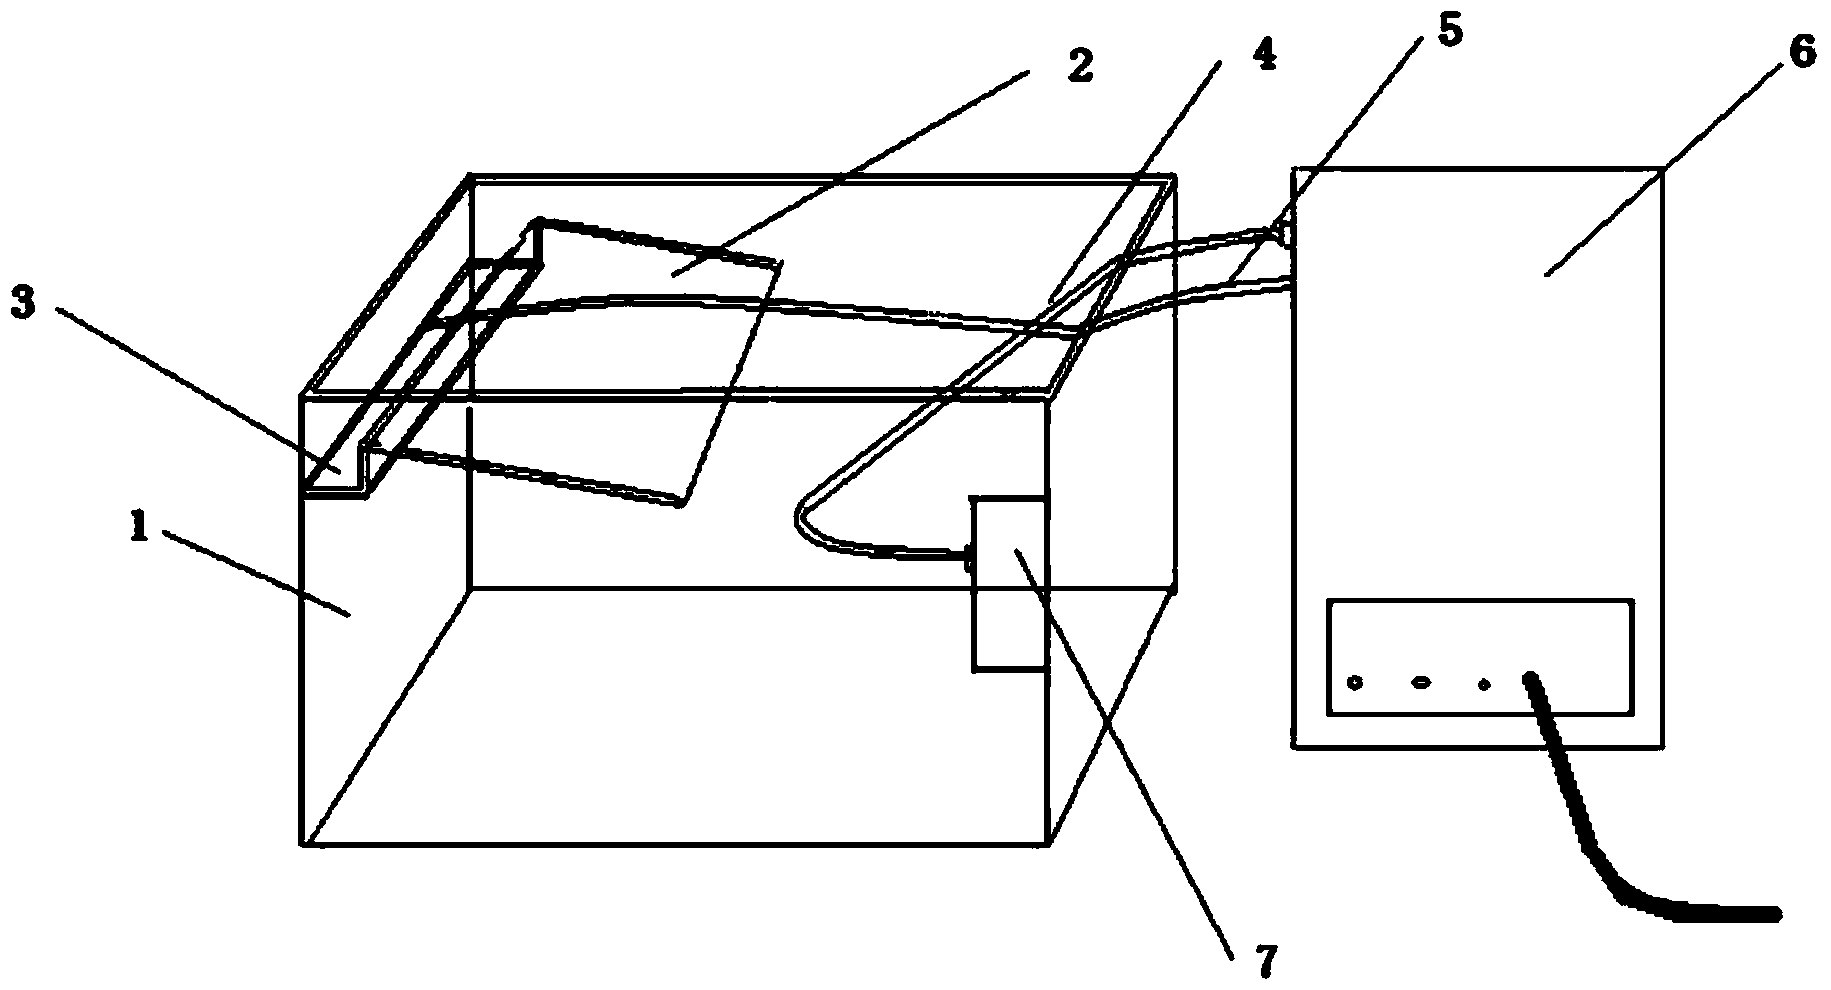 Cooling water circulation device for condensation point instrument